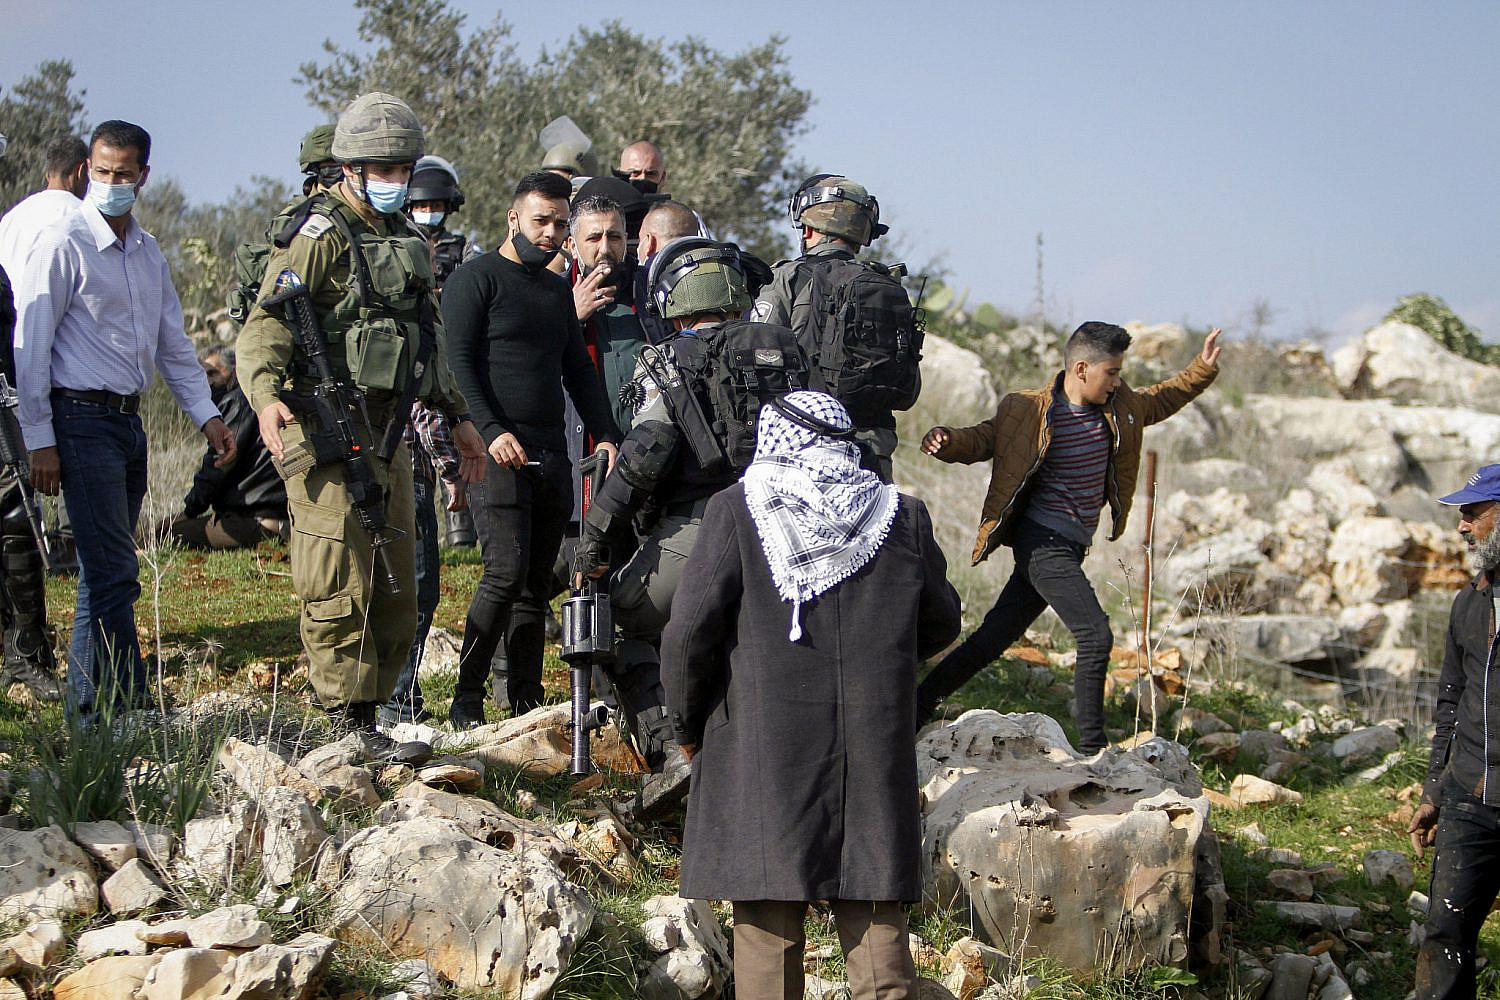 Israeli soldiers surround Palestinians planting olive trees near the settlement of Ariel in the West Bank. December 22, 2020. (Nasser Ishtayeh/Flash90)